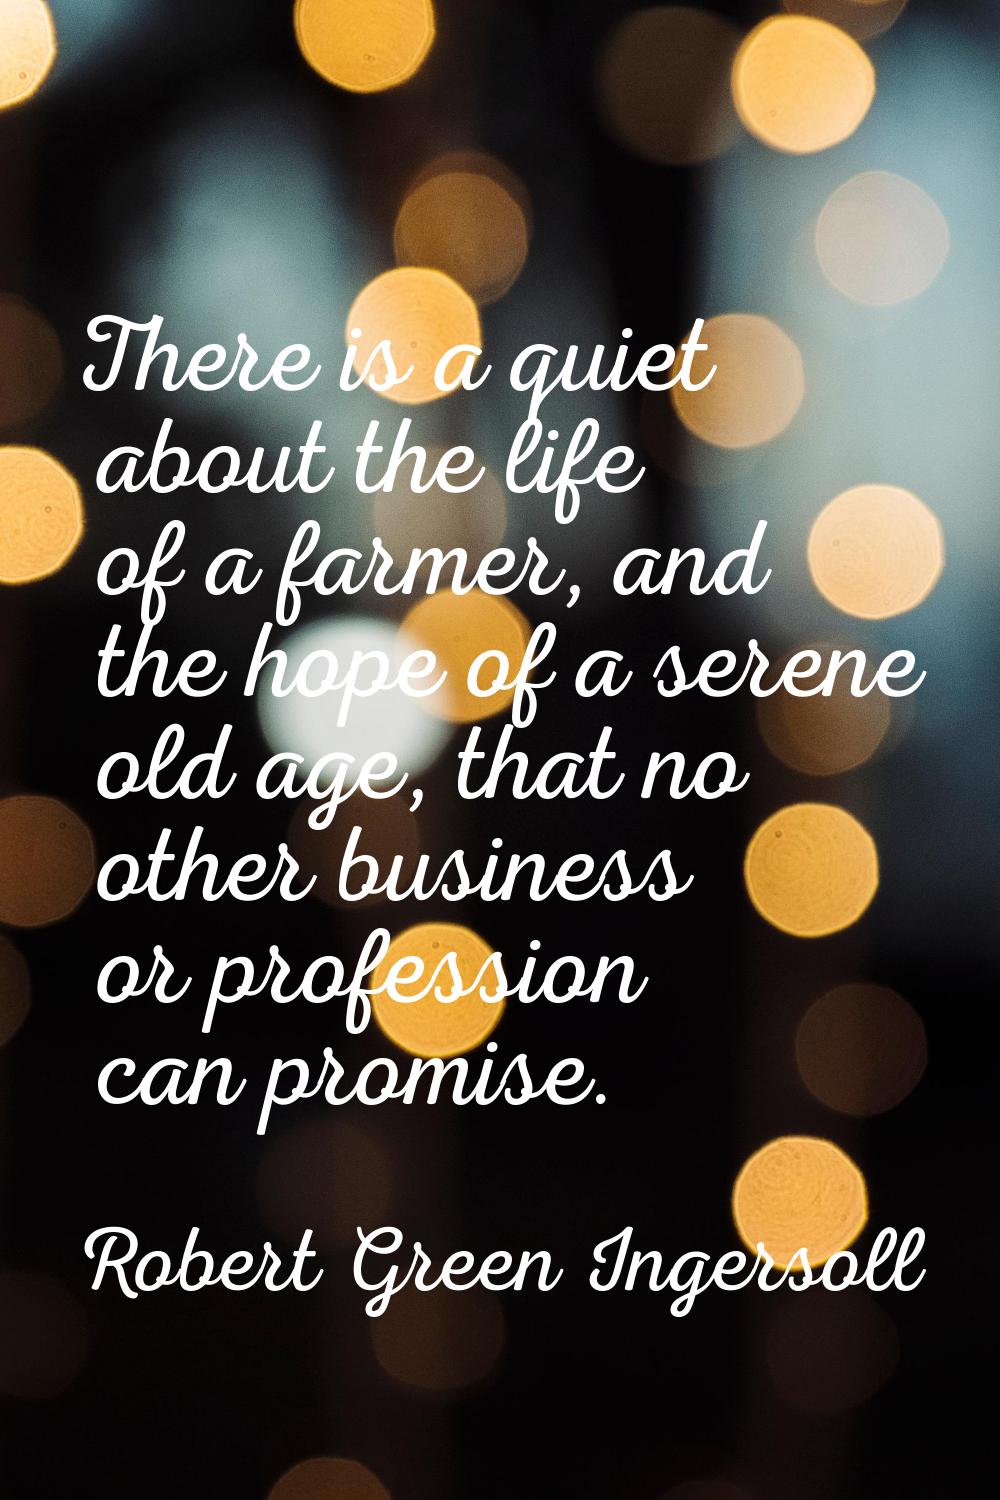 There is a quiet about the life of a farmer, and the hope of a serene old age, that no other busine